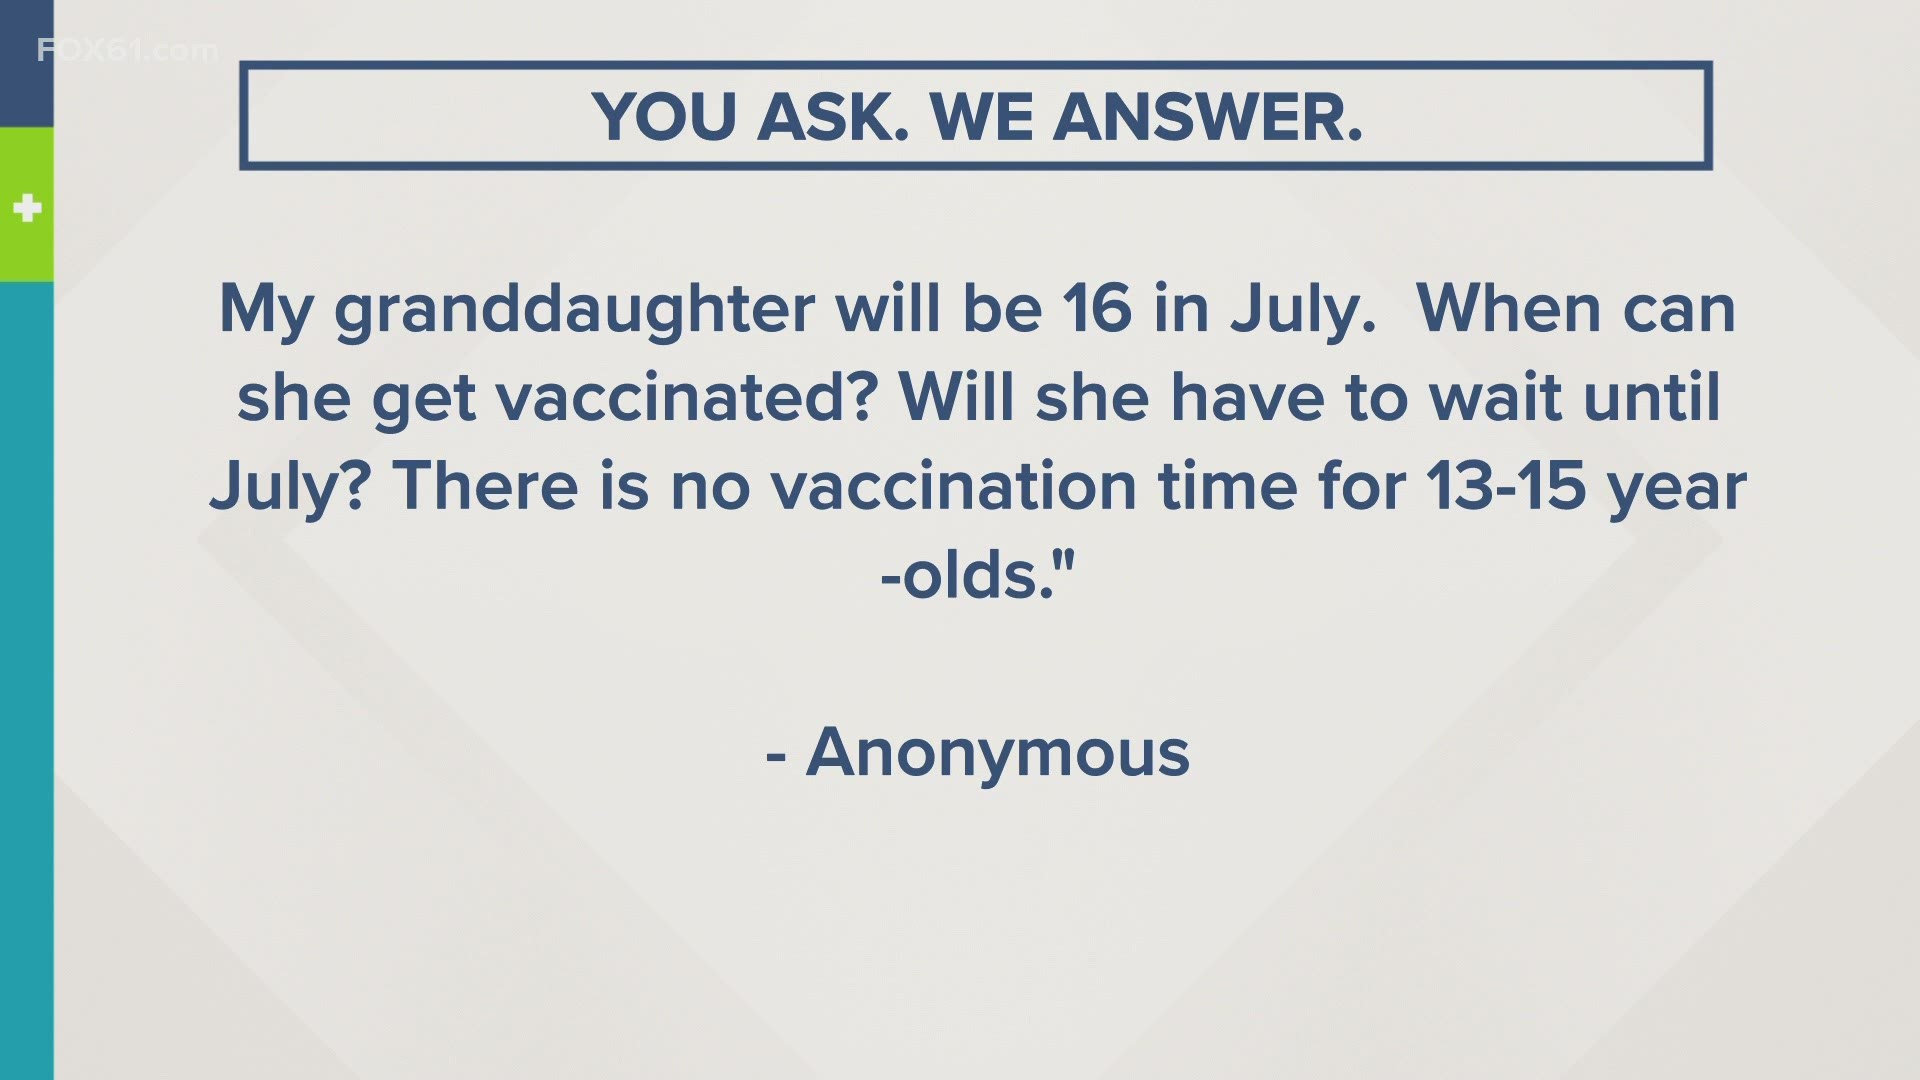 Many people still have questions about COVID-19 and the vaccine.